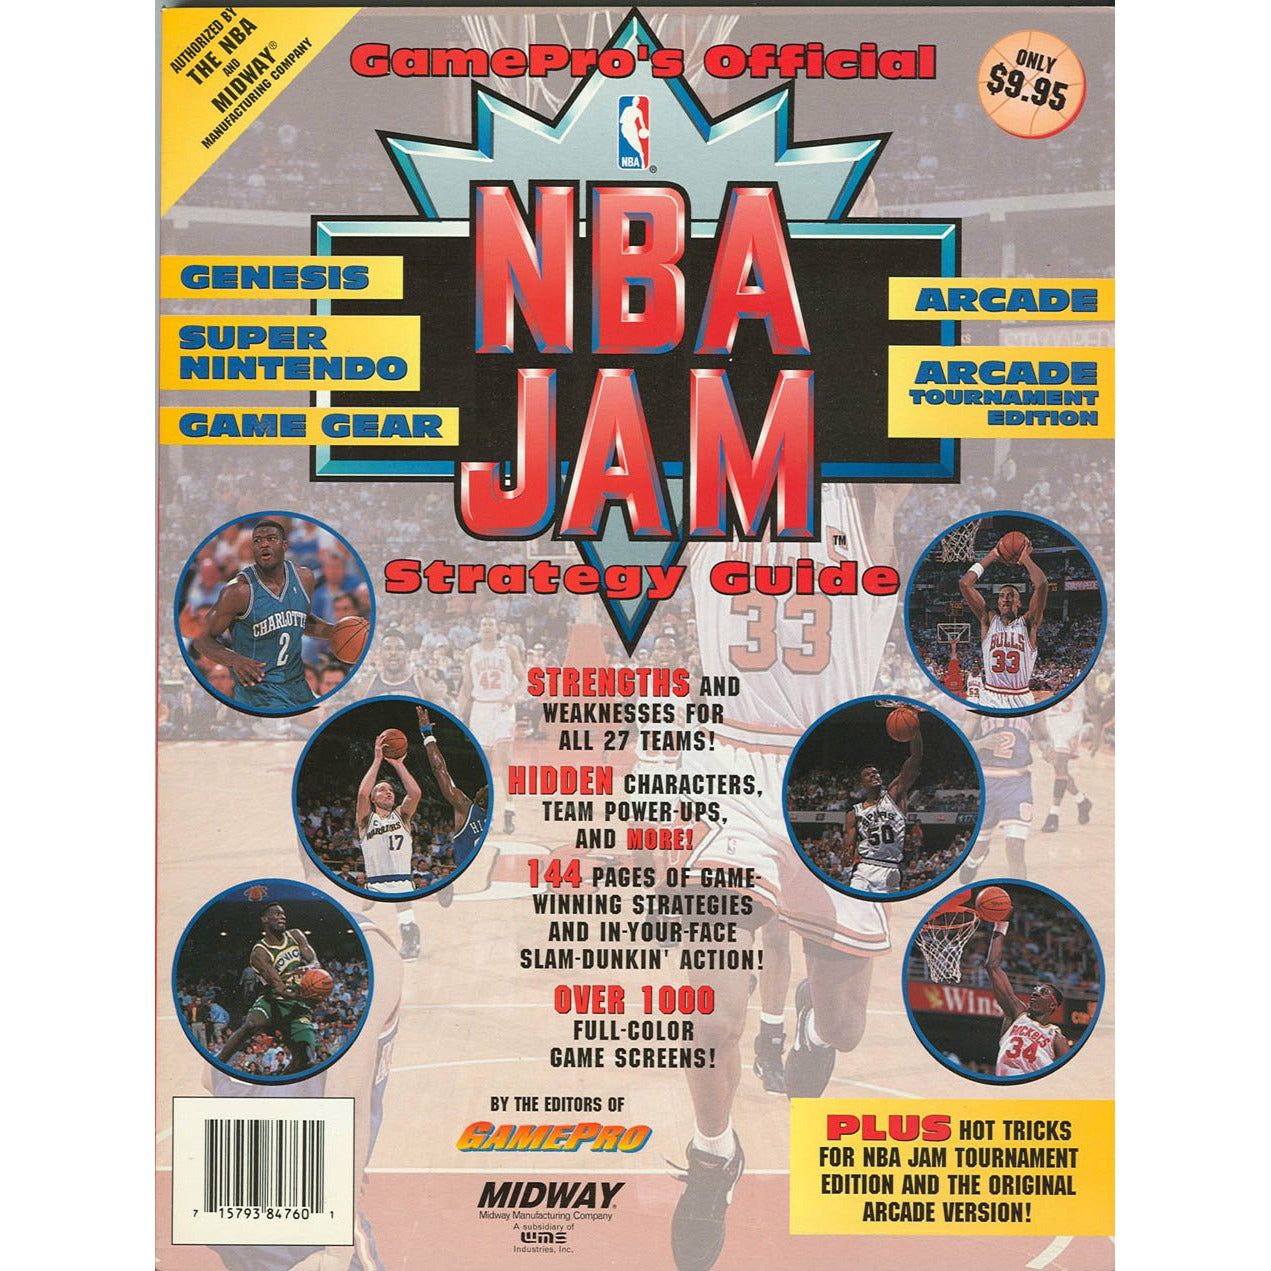 STRAT - GamePro's Official NBA JAM Strategy Guide